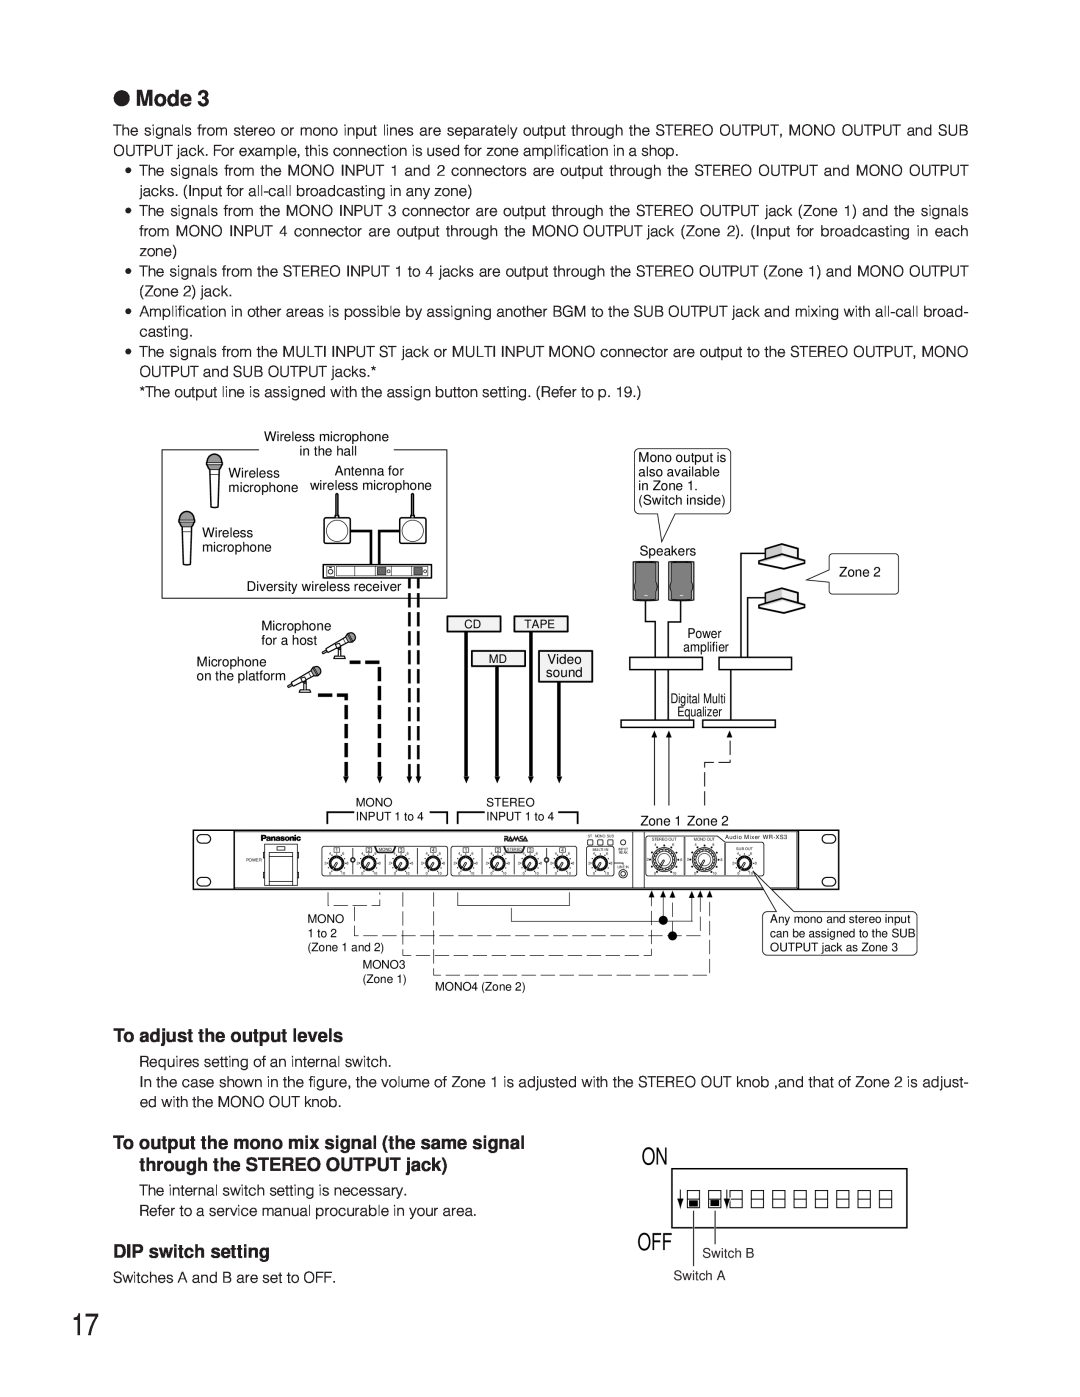 Panasonic WR-XS3P operating instructions On Off, Mode, To adjust the output levels, DIP switch setting 